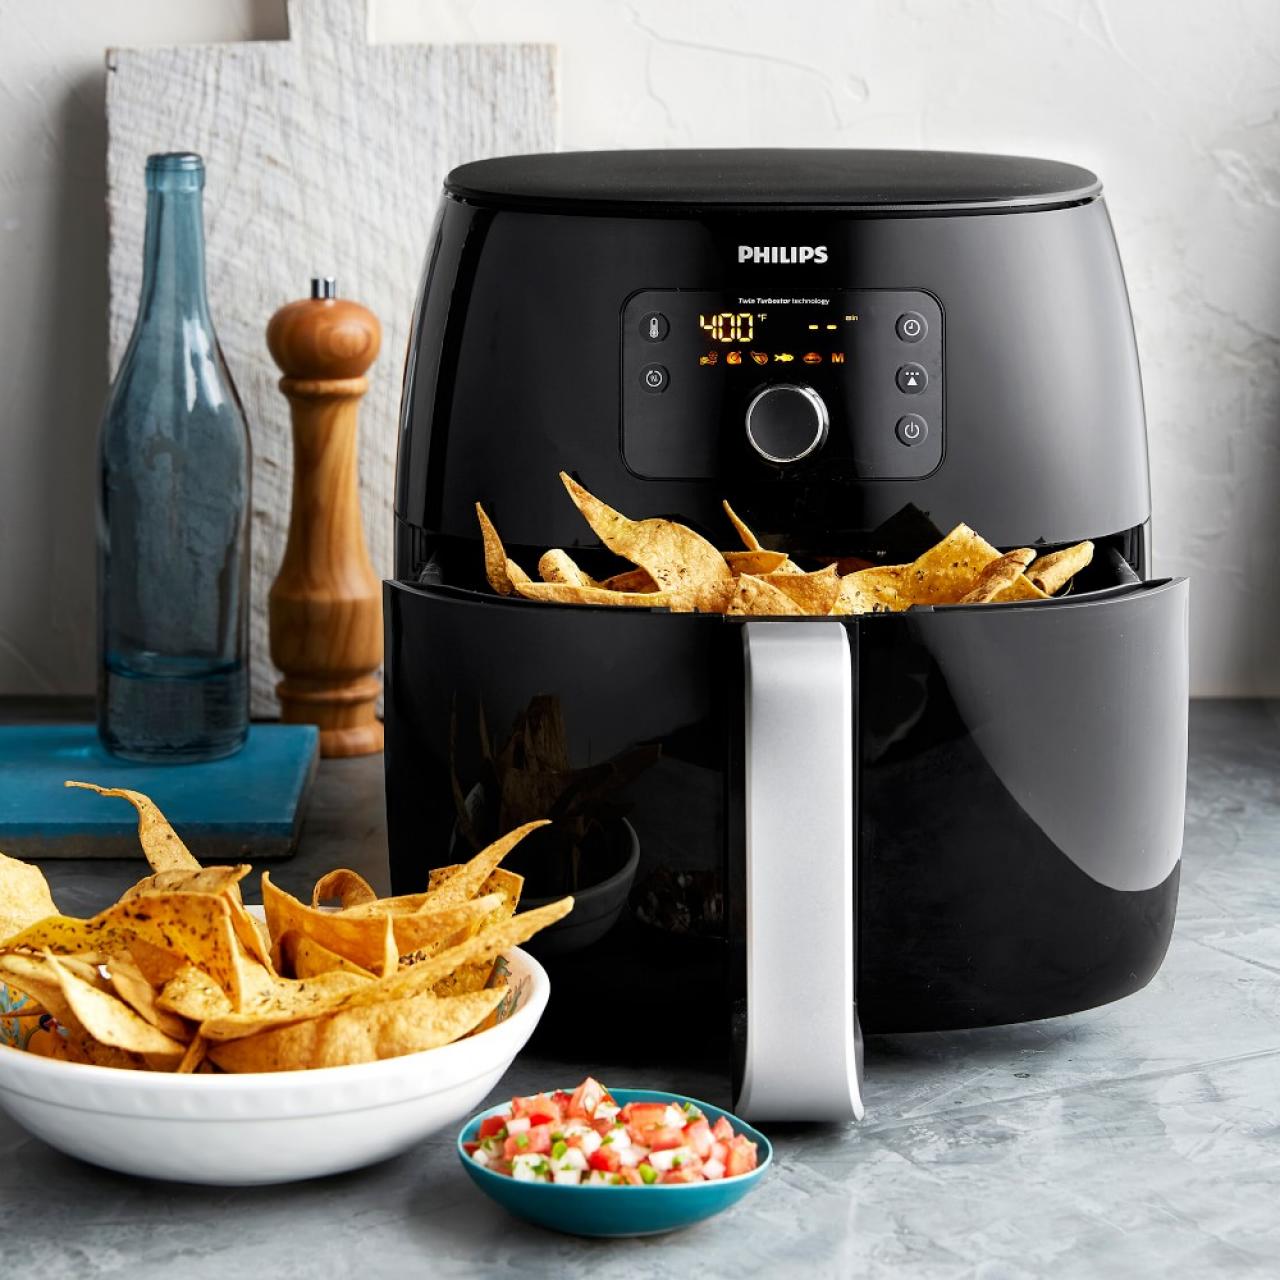 https://hgtvhome.sndimg.com/content/dam/images/hgtv/products/2020/12/7/3/RX_Williams-Sonoma_philips-premium-digital-airfryer-xxl-with-fat-removal-tech-z.jpg.rend.hgtvcom.1280.1280.suffix/1607380167692.jpeg